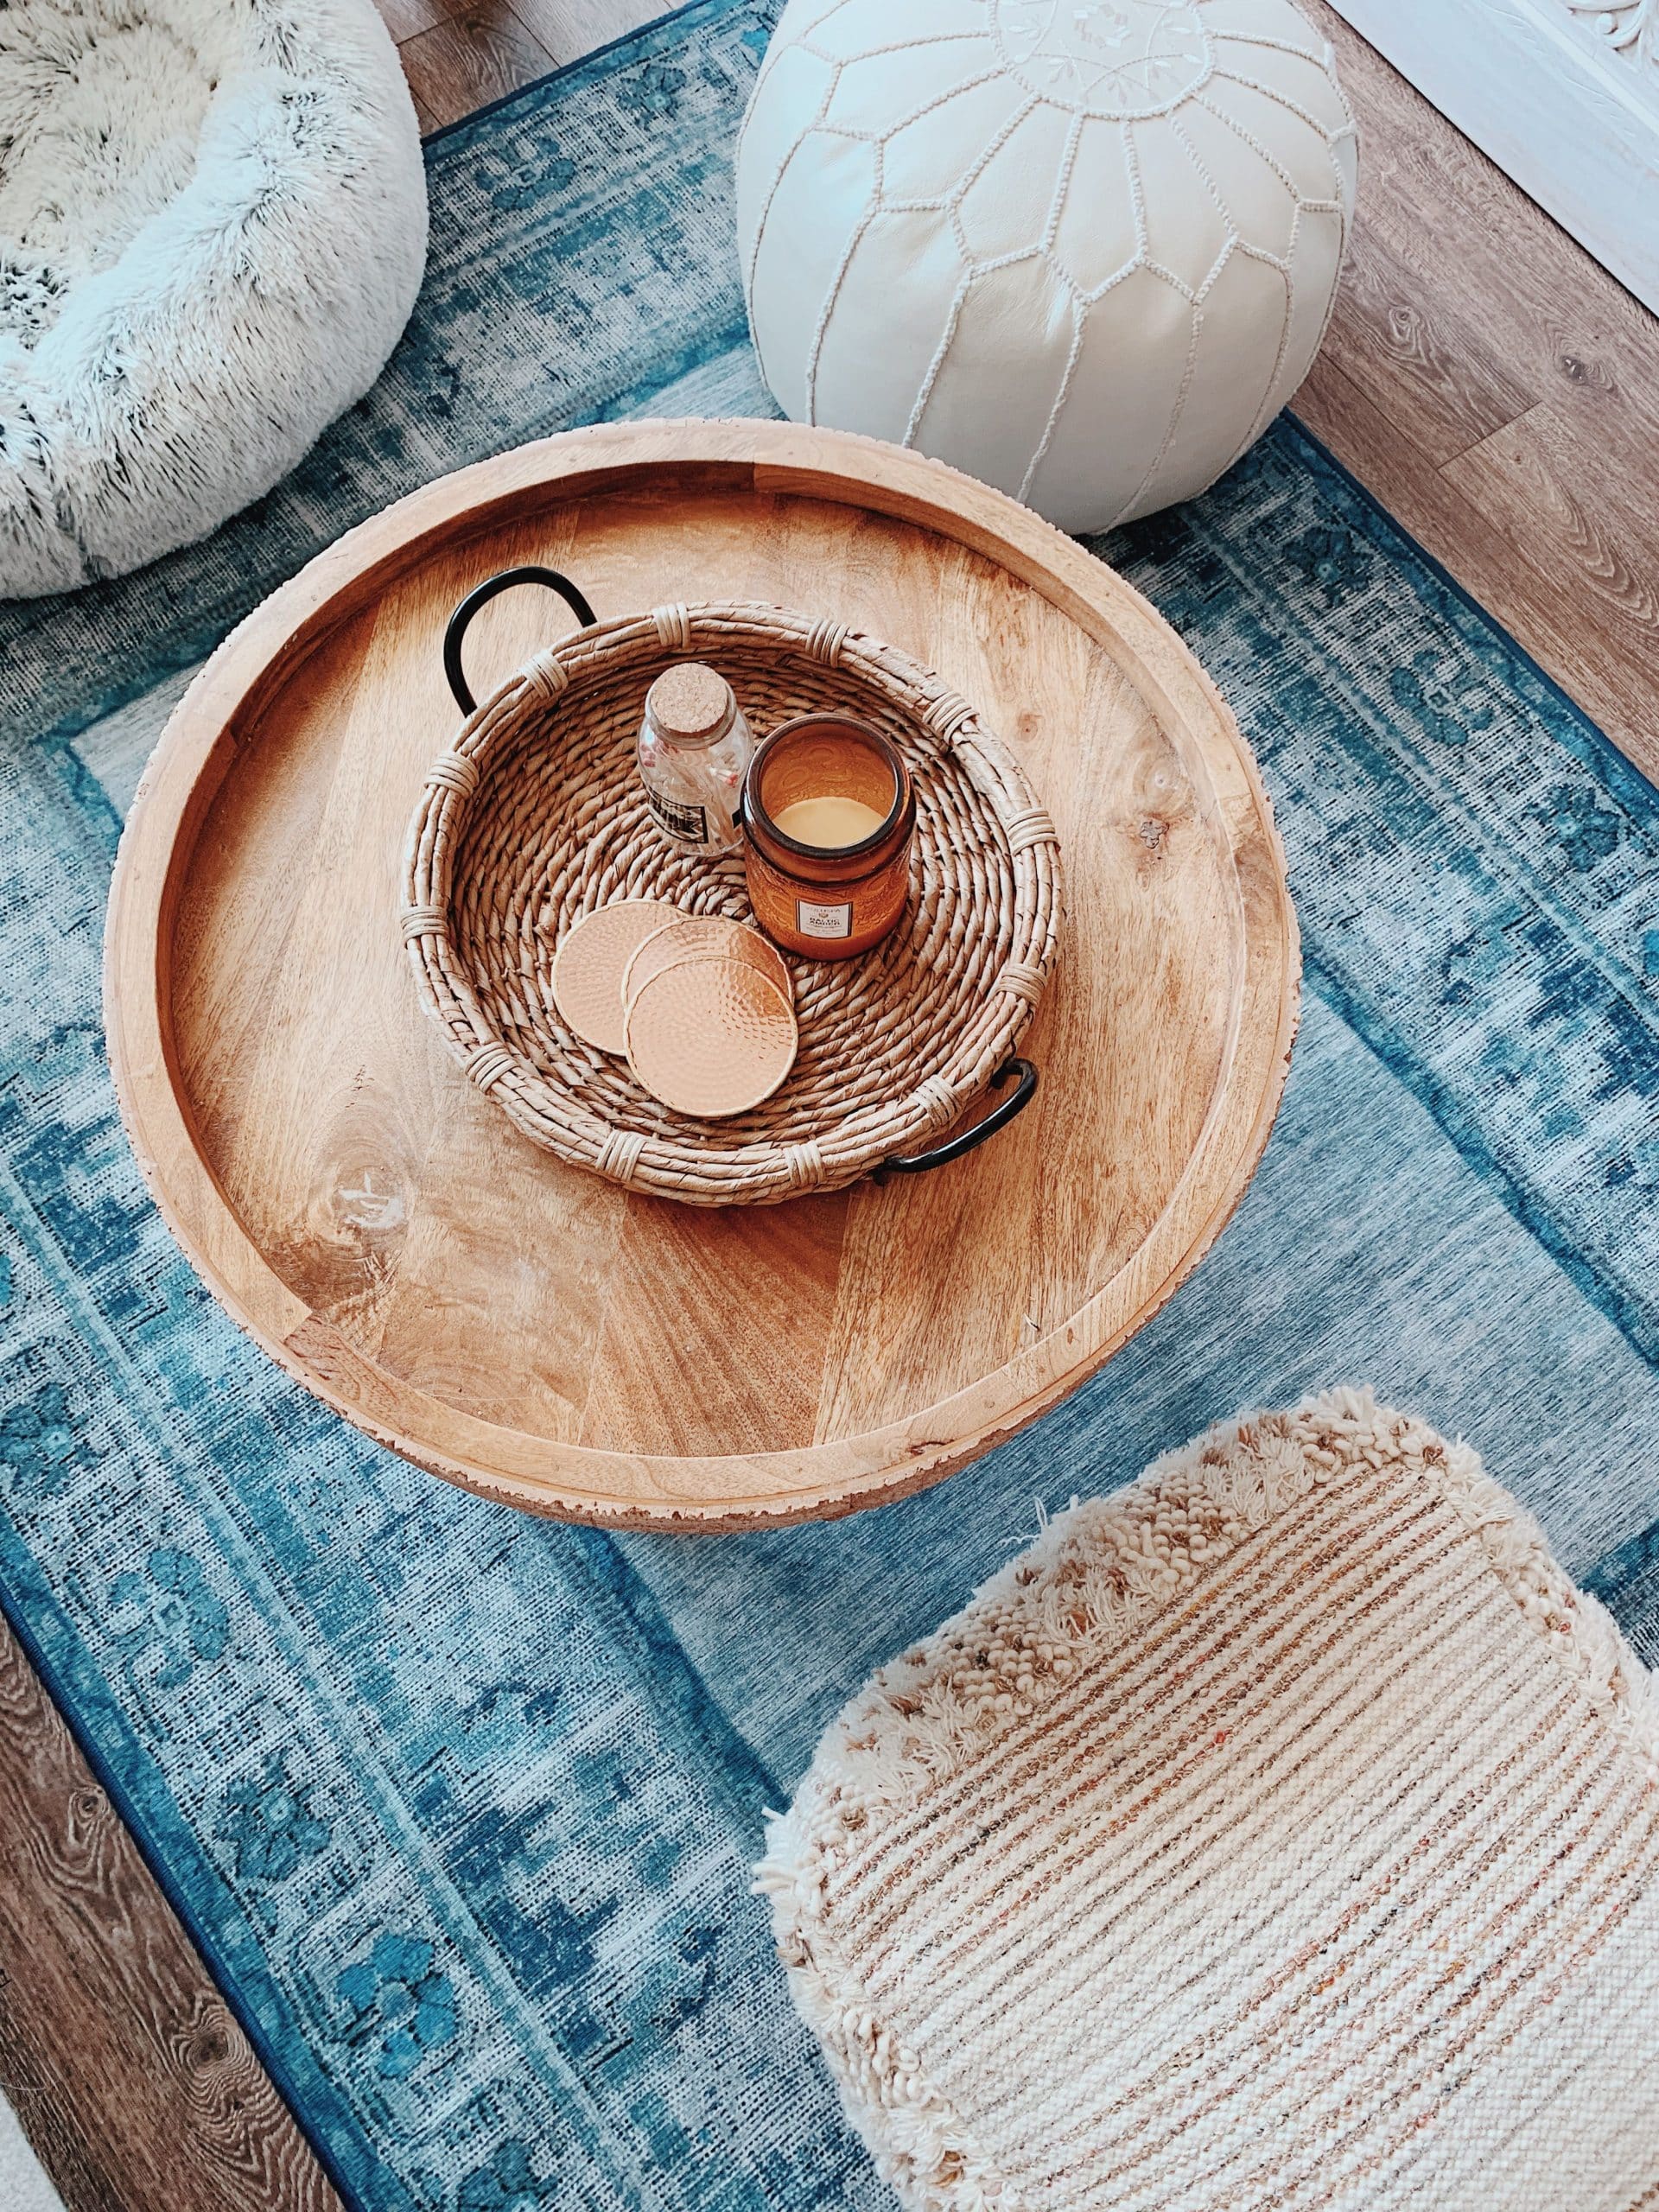 17 Stunning Bohemian Coffee Tables for a Boho Chic Look